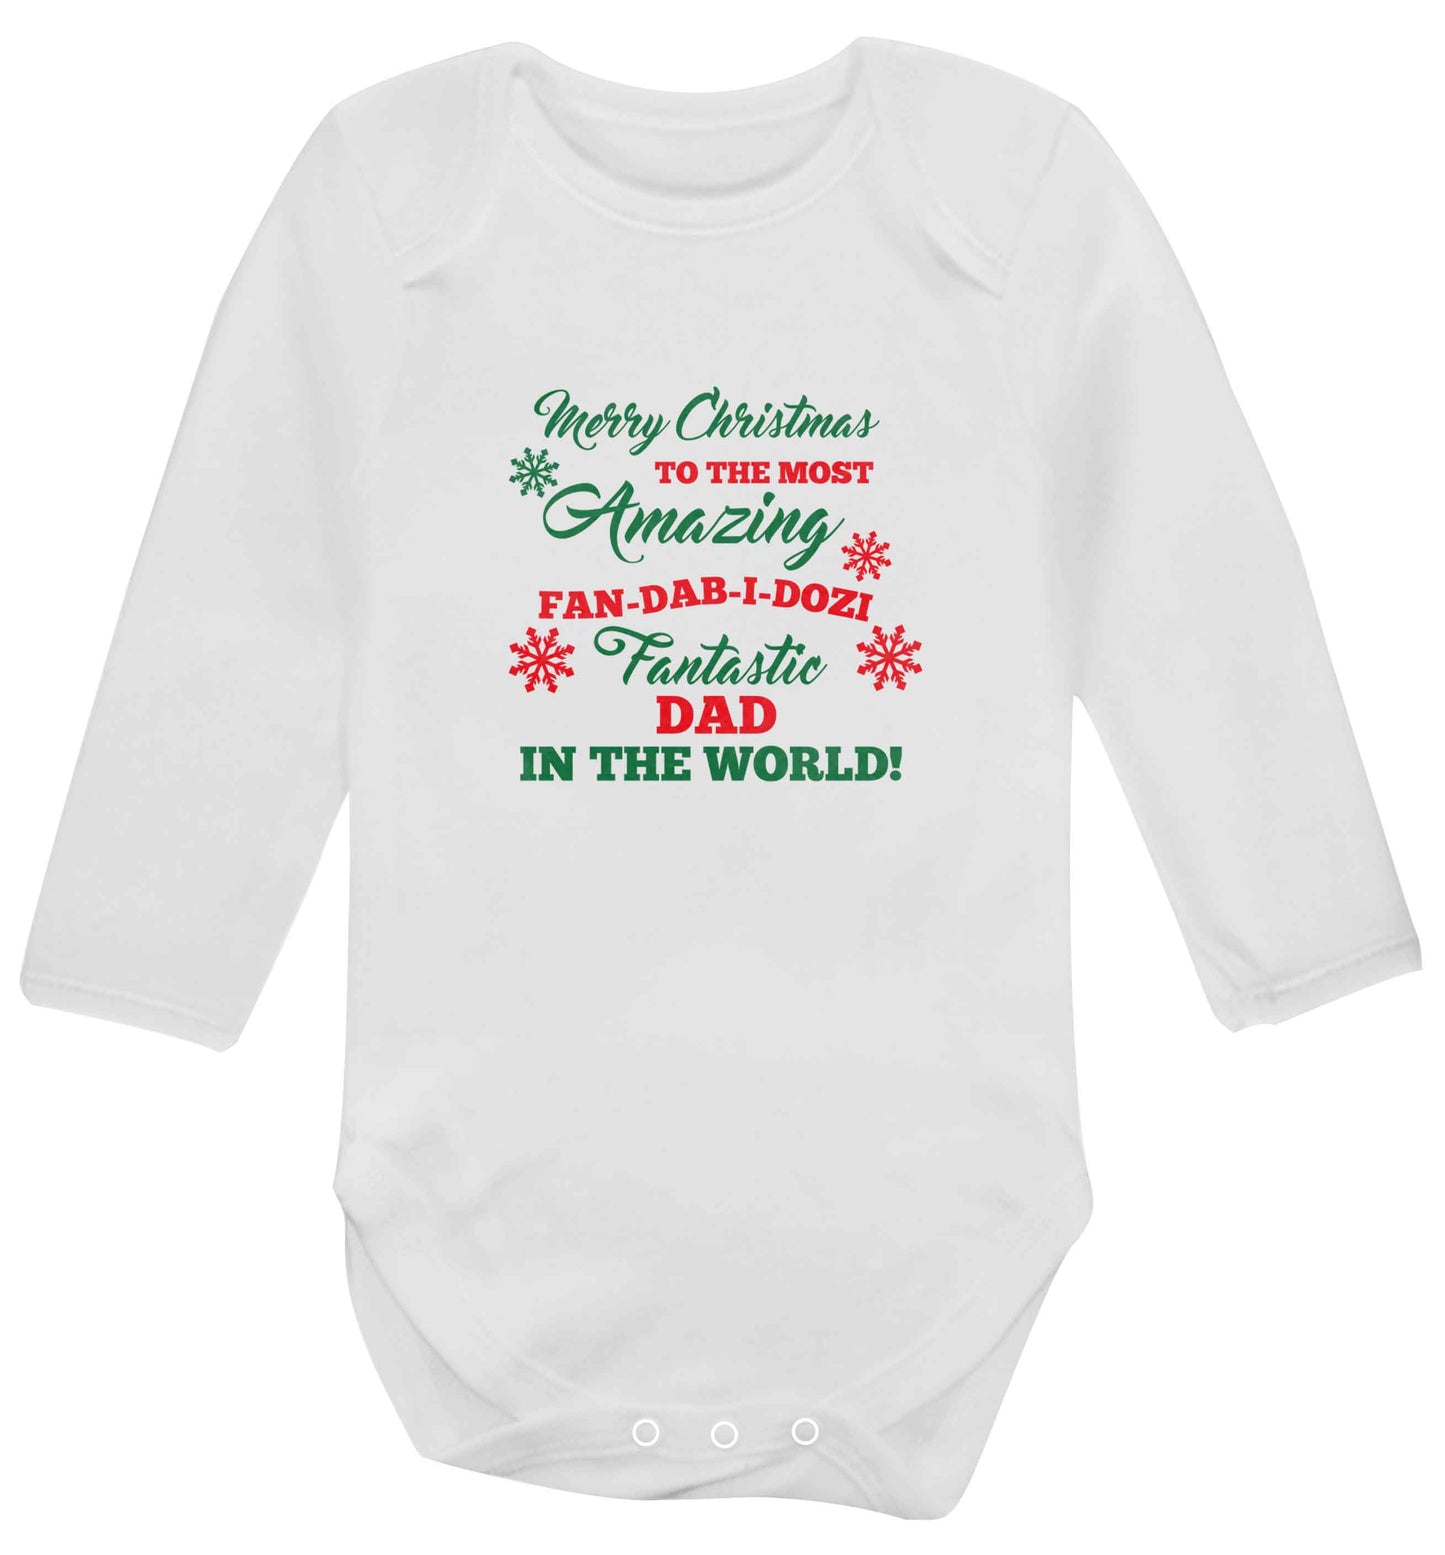 Merry Christmas to the most amazing fan-dab-i-dozi fantasic Dad in the world baby vest long sleeved white 6-12 months